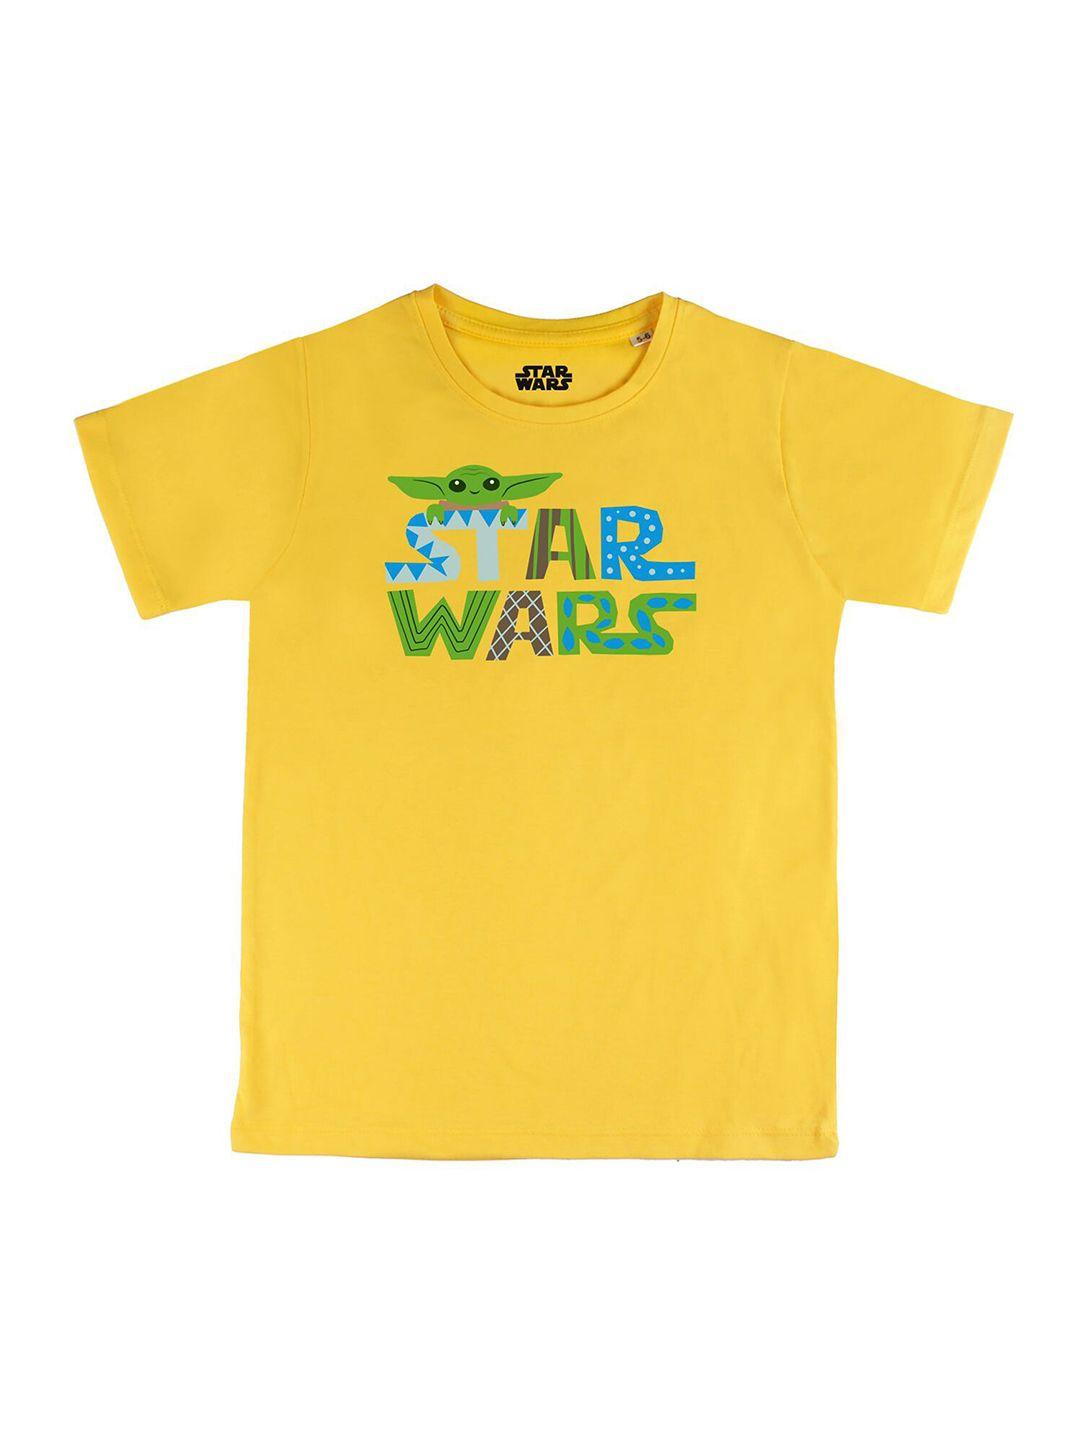 star-wars-by-wear-your-mind-boys-yellow-typography-star-wars-printed-t-shirt